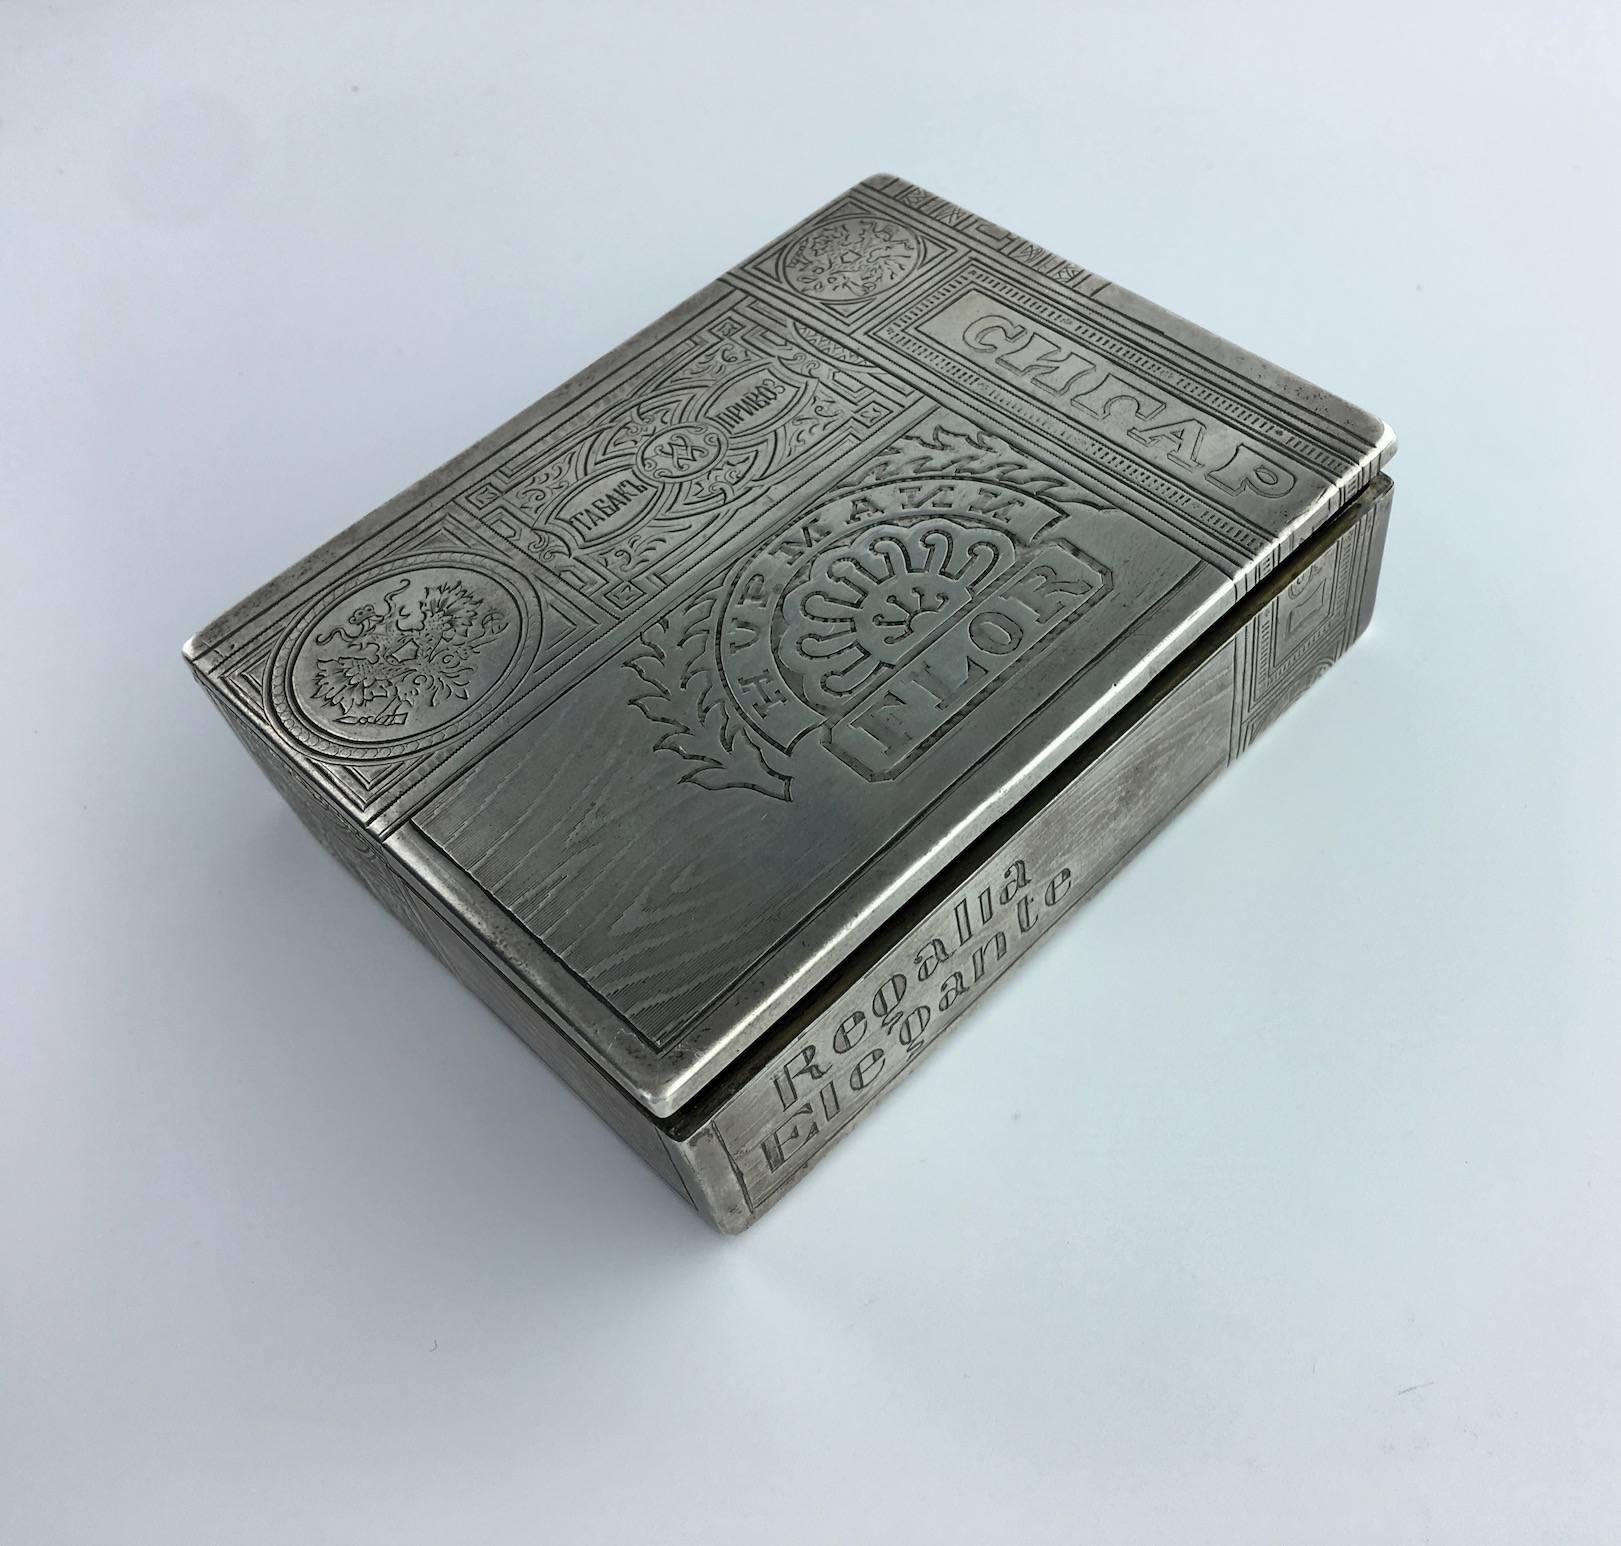 Top of the Top! This Cigar box is stunning with Russian inscriptions and Cuban cigar brands illustrations. Massive Silver (vermeil inside).

Russian marks.
Mid 20th Century.